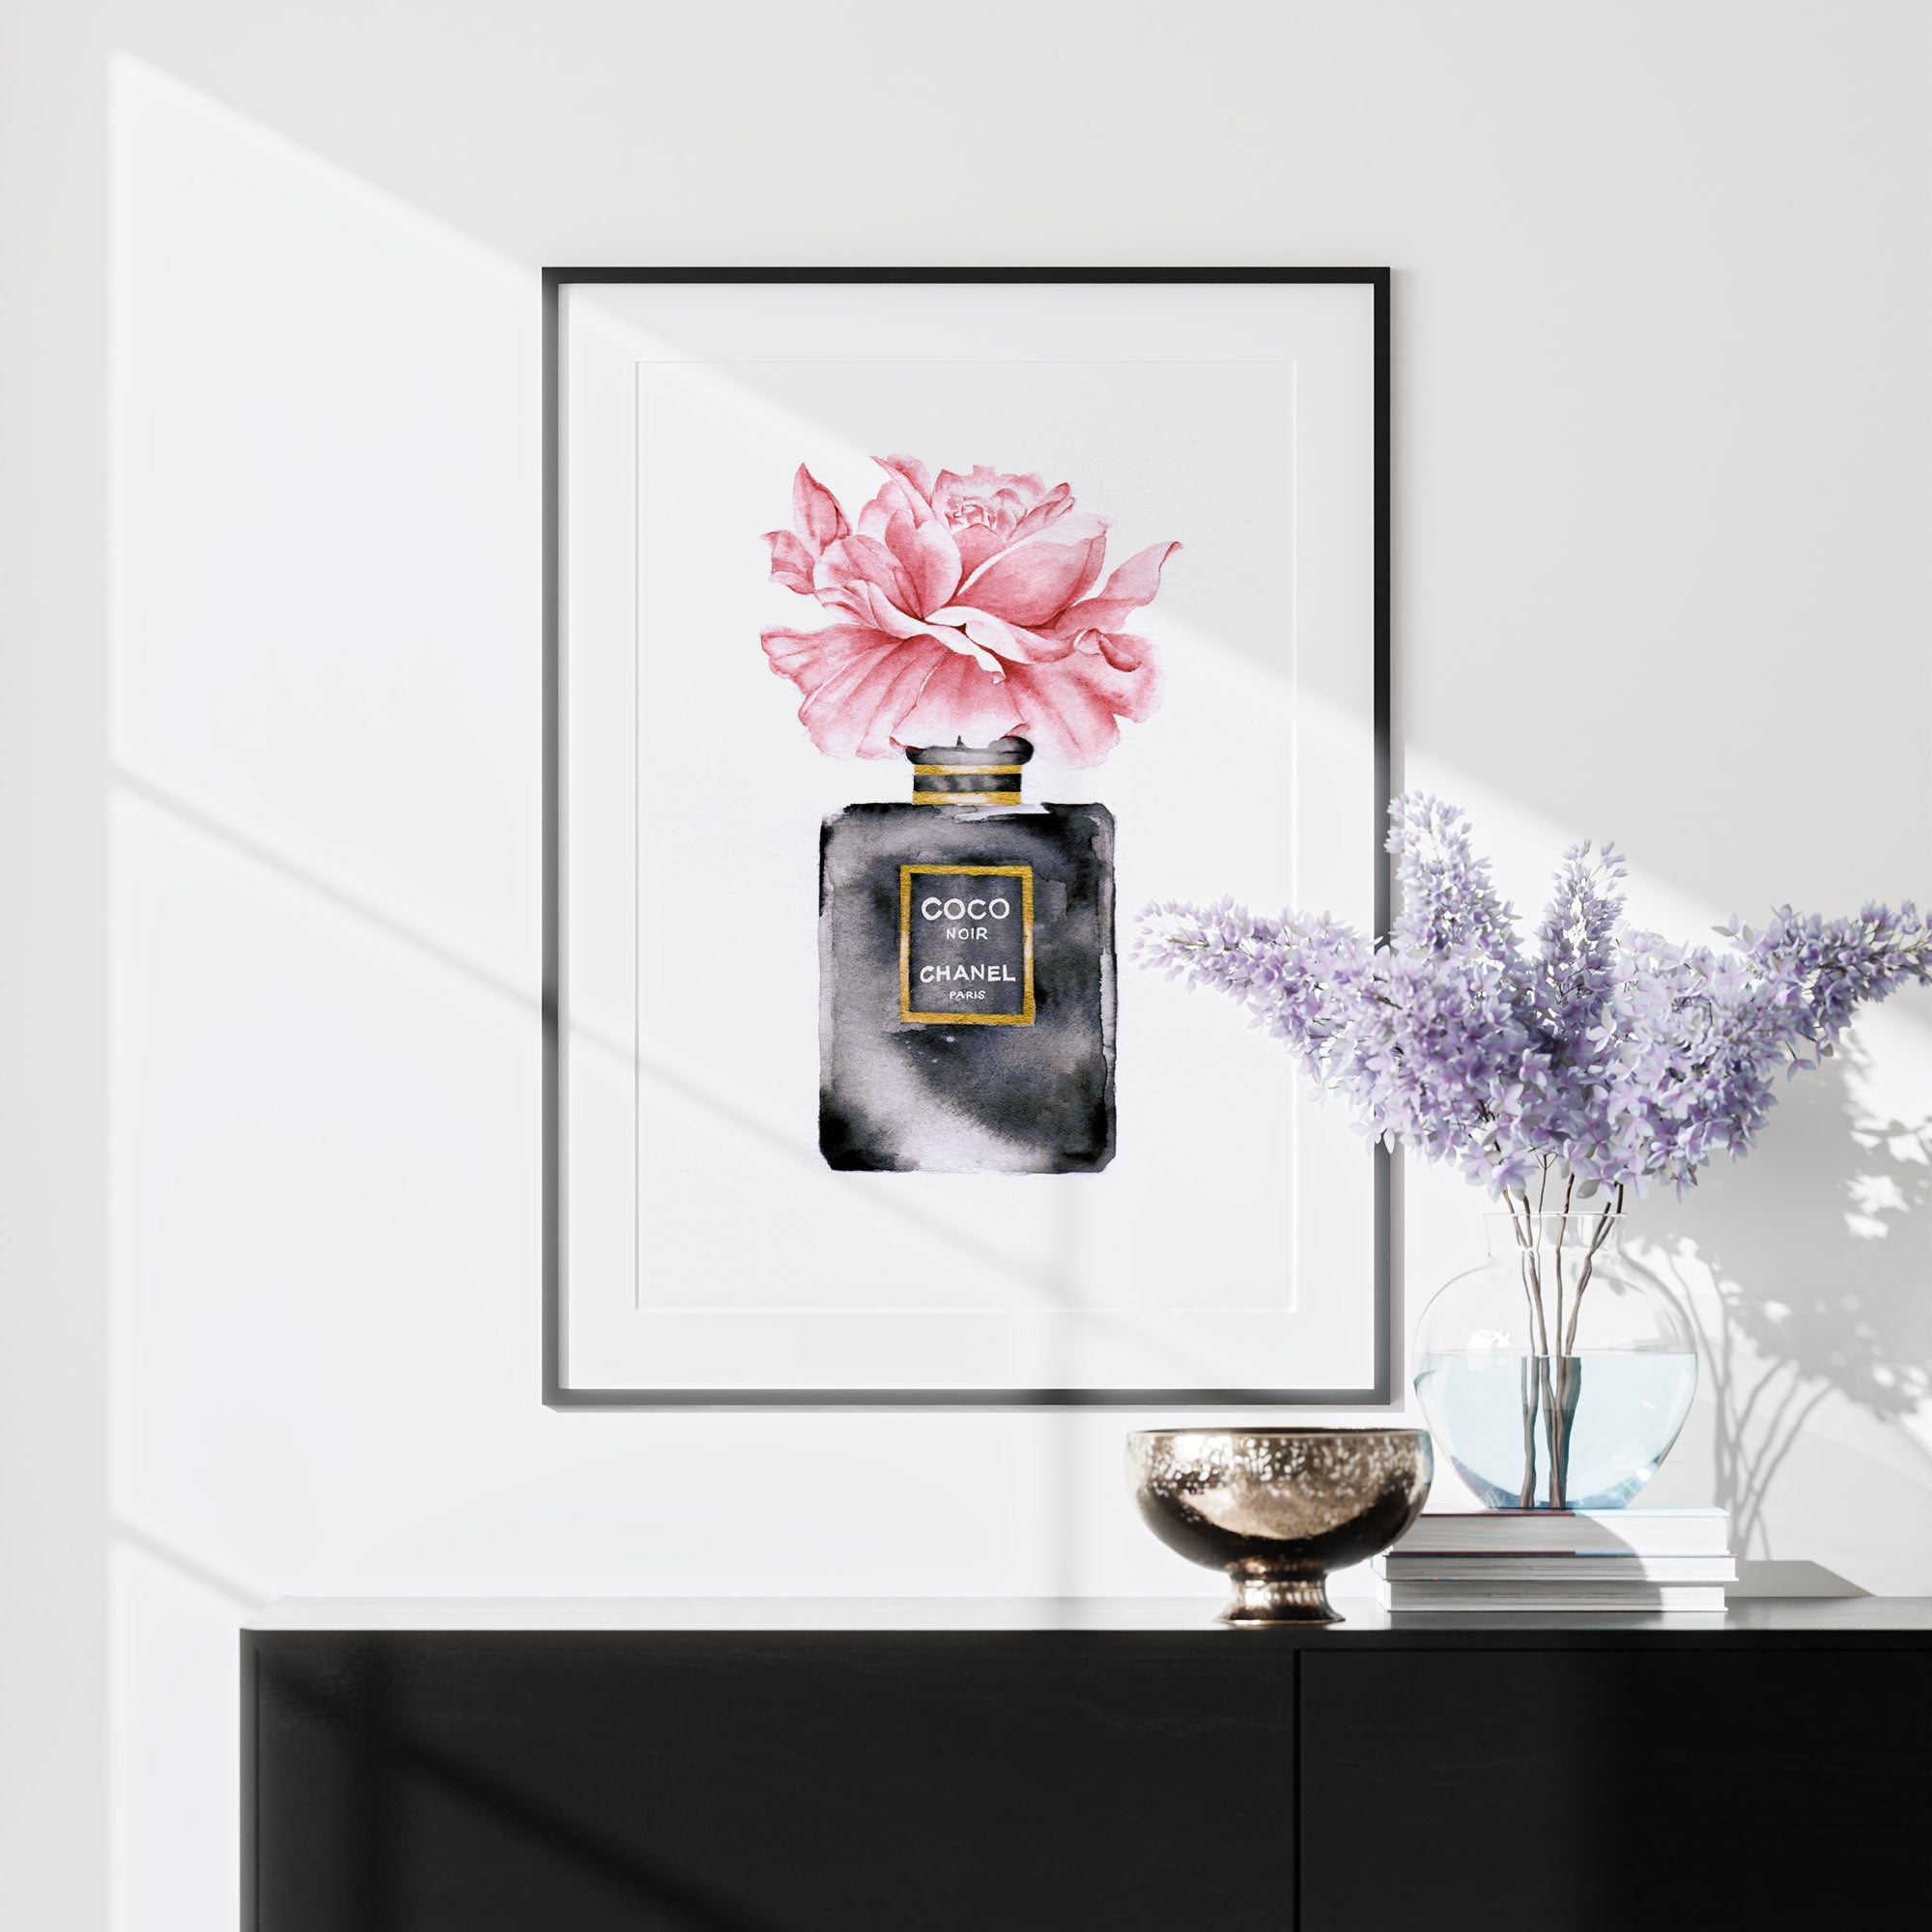 purple chanel pictures wall decor